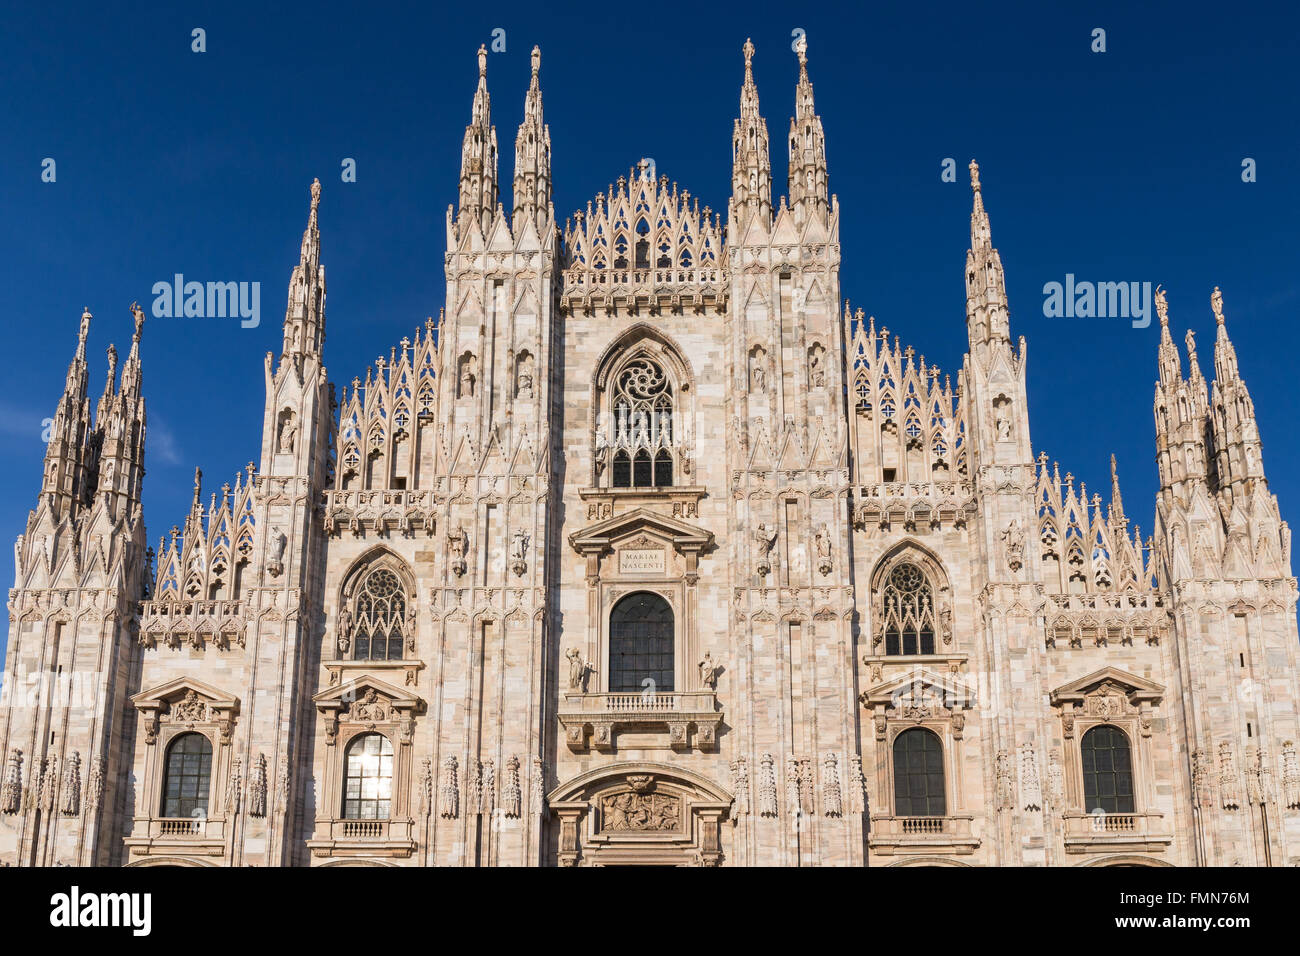 Duomo Cathedral of Milan Italy - roof detail spiers Stock Photo